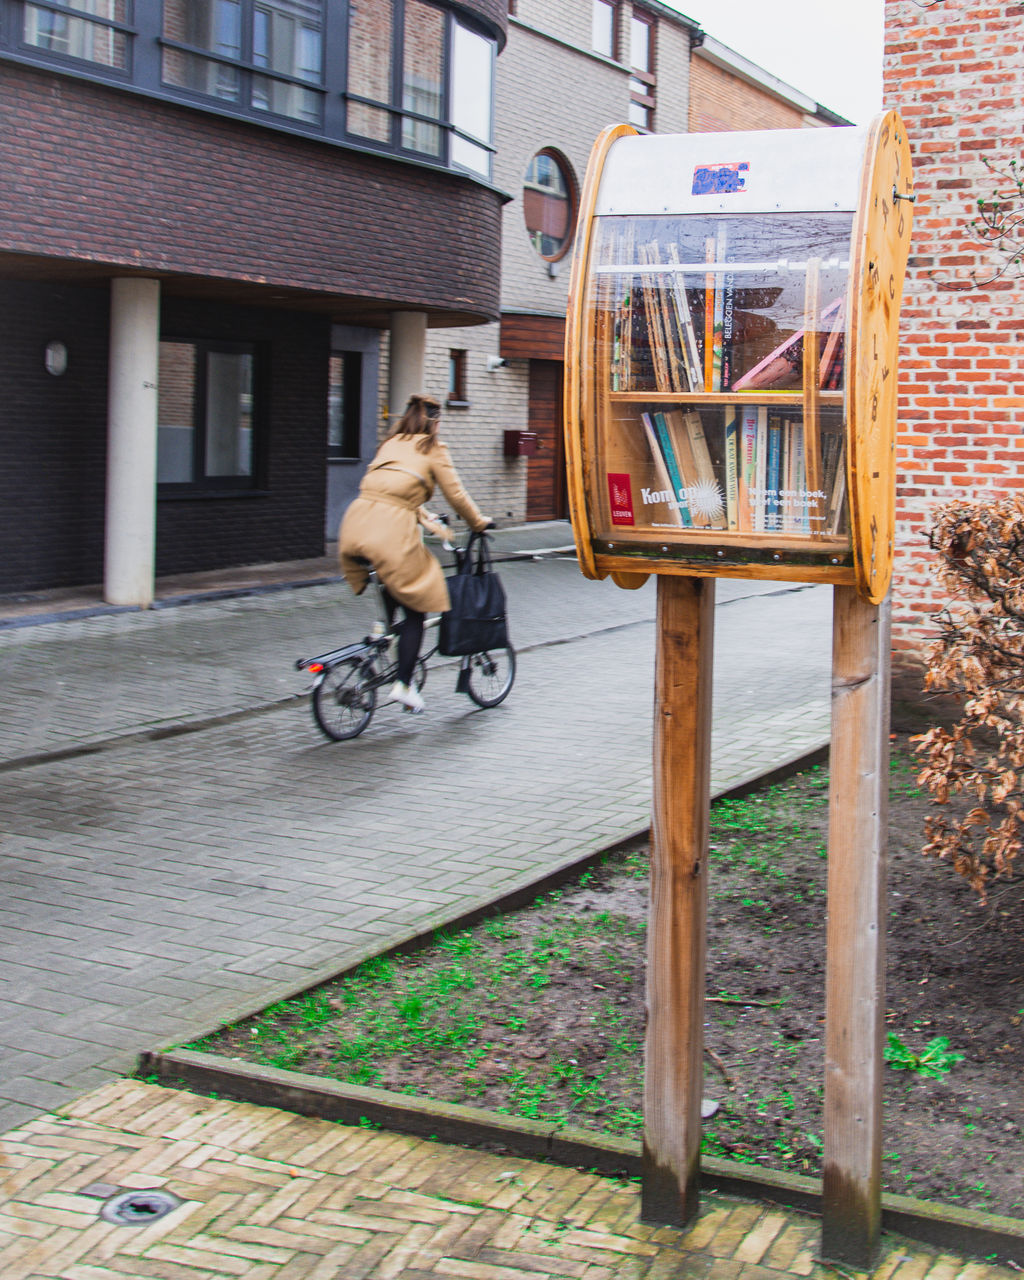 MAN RIDING BICYCLE BY BUILDING